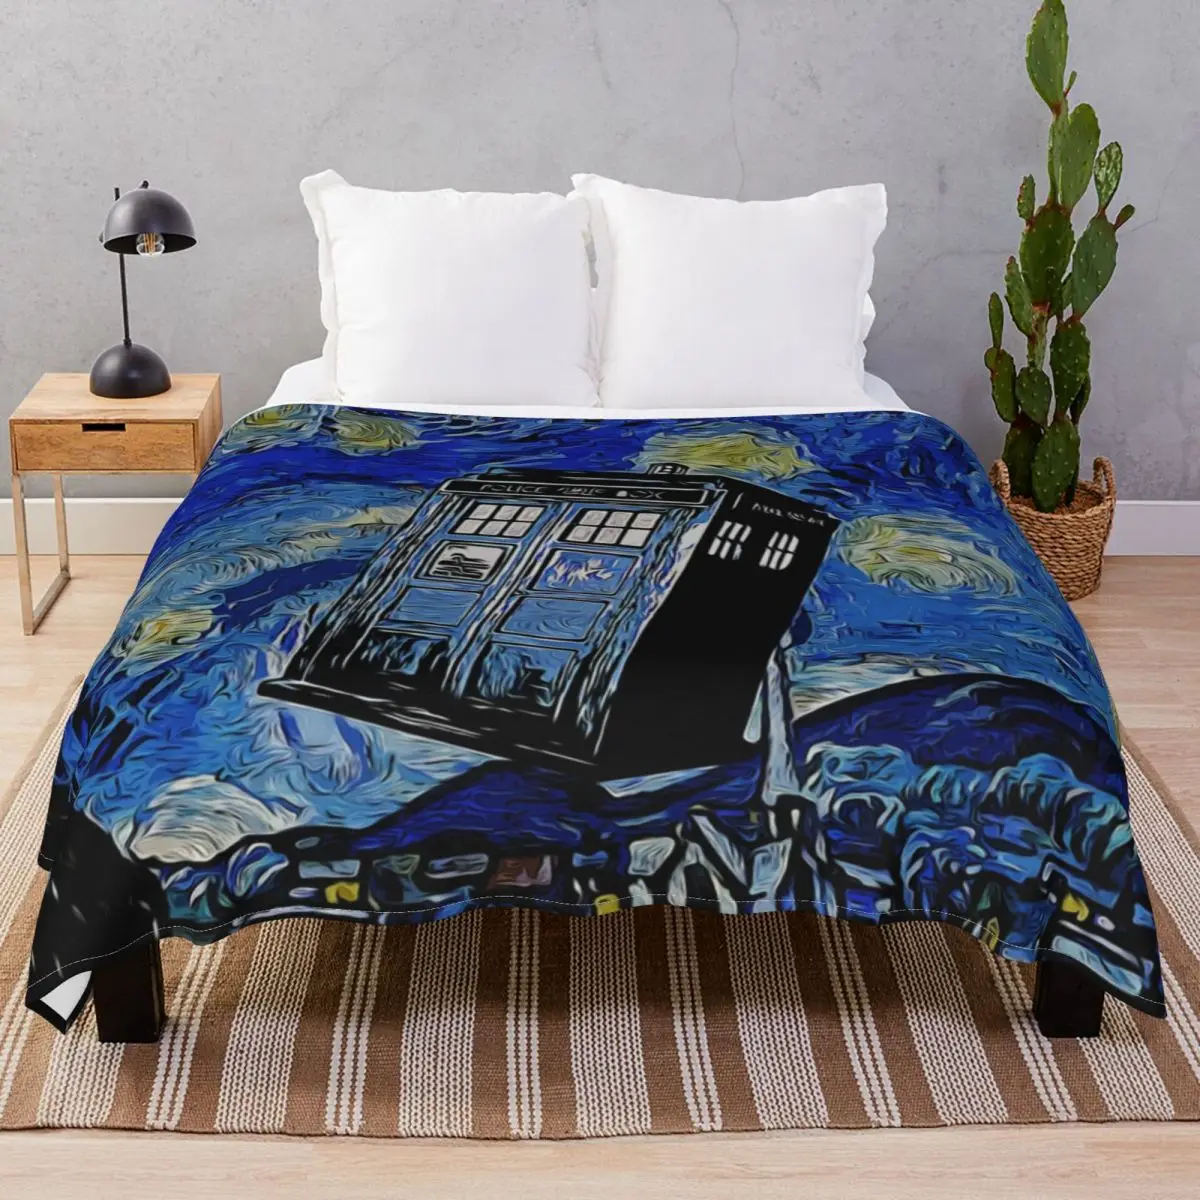 Van In Time Blankets Flannel Print Super Soft Throw Blanket for Bed Sofa Travel Cinema